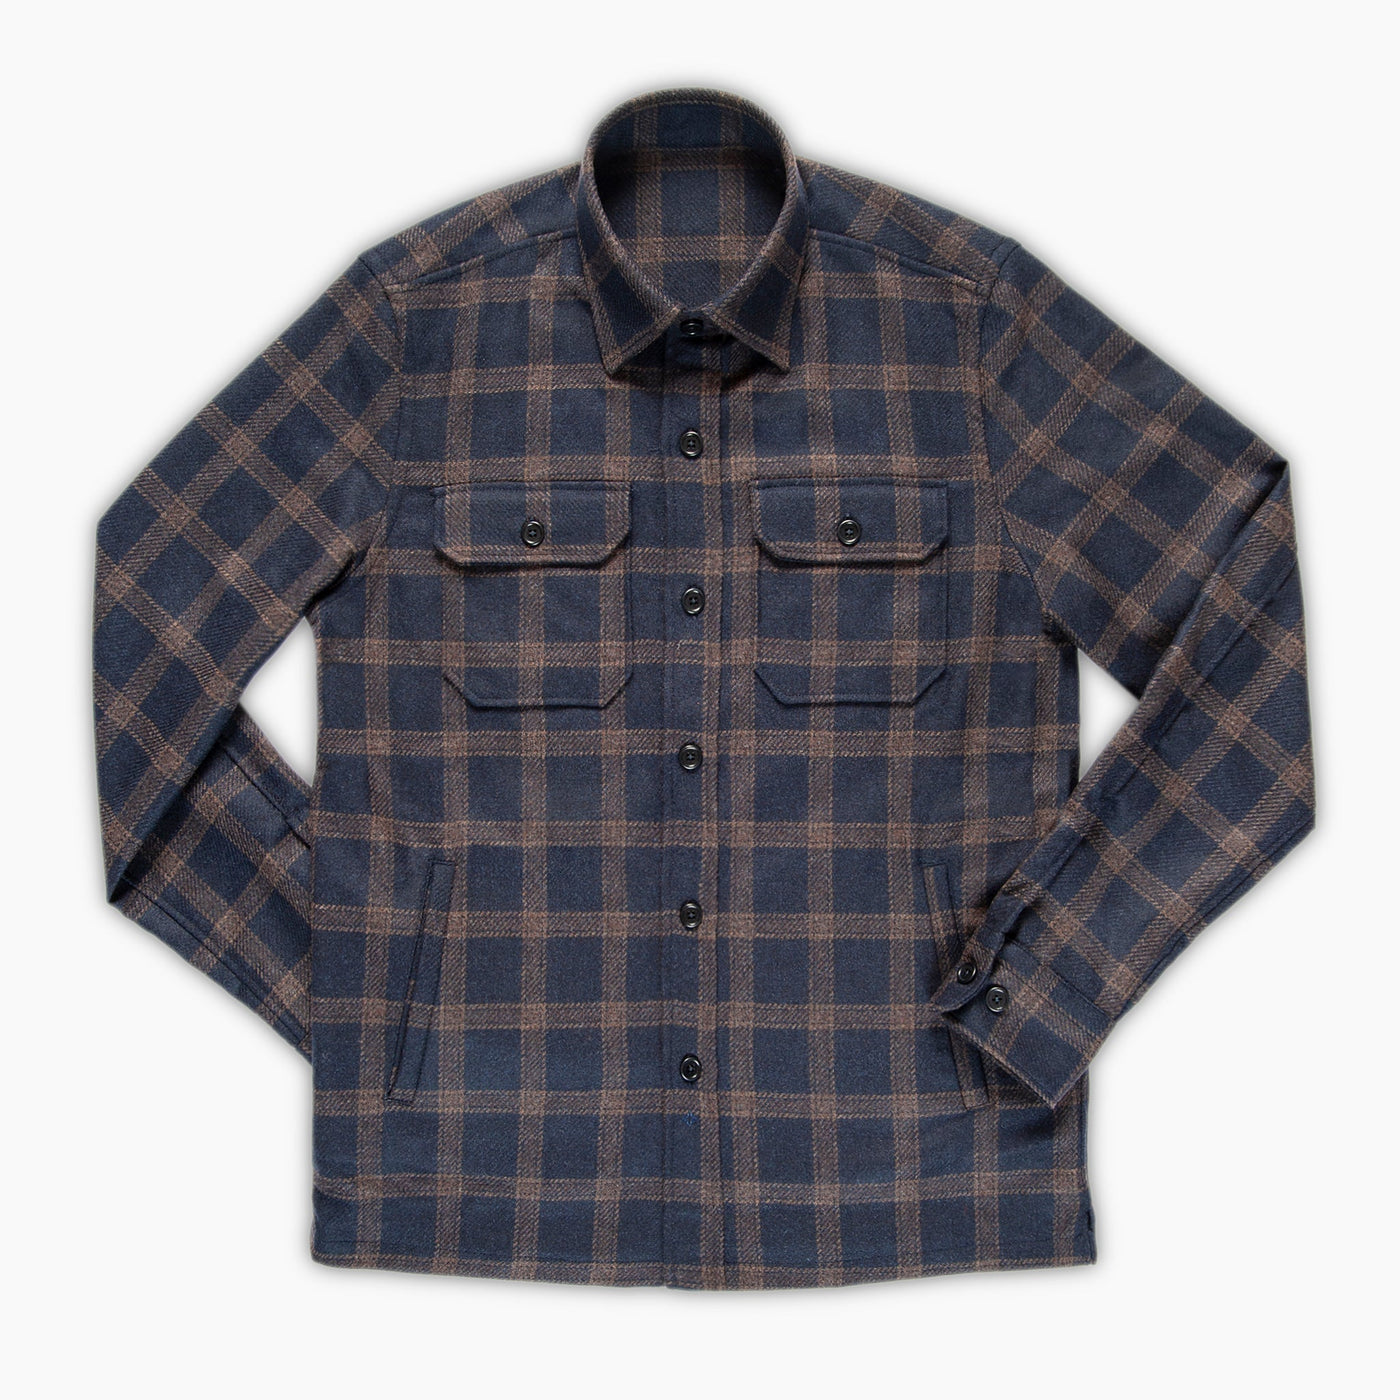 David check Jebric Outer Shirt blue and brown